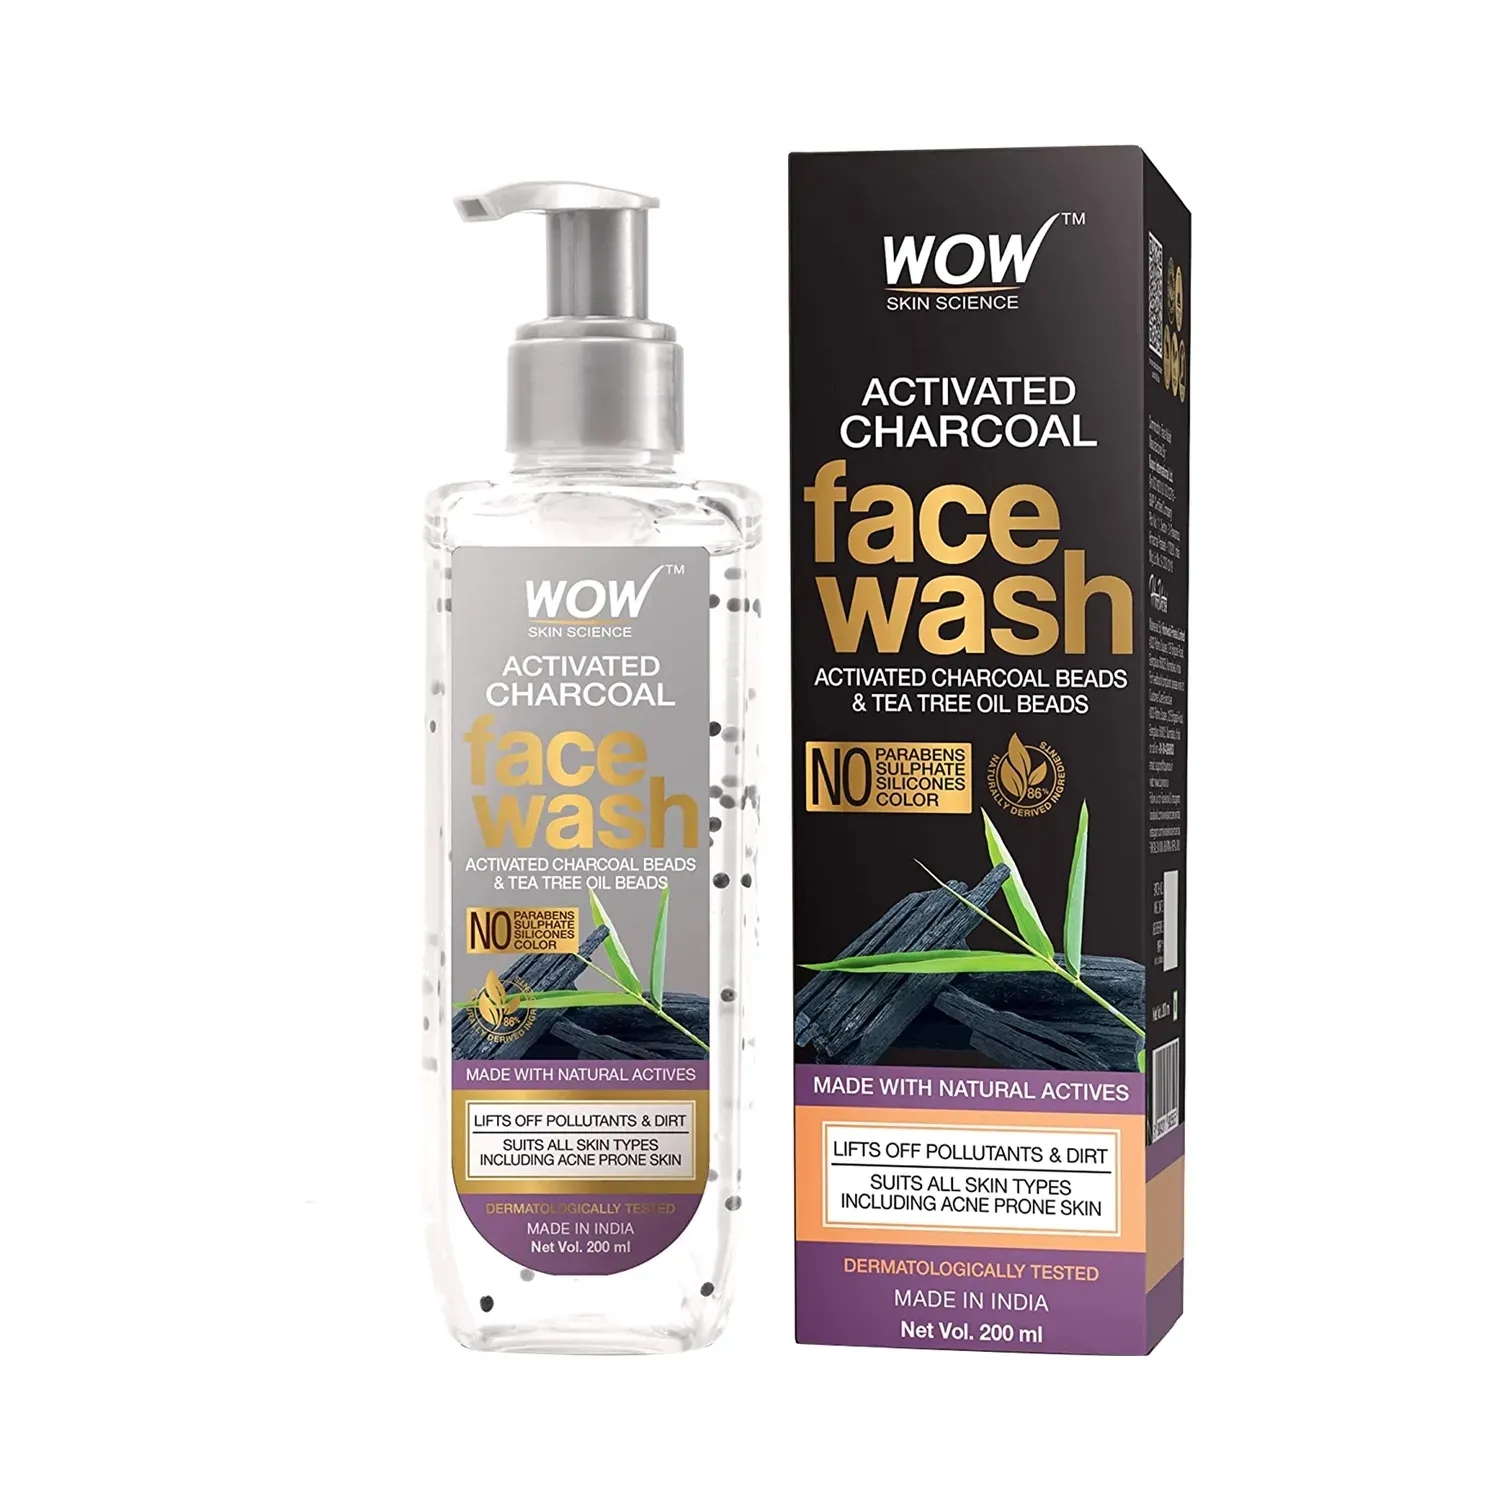 WOW SKIN SCIENCE | WOW SKIN SCIENCE Activated Charcoal Face Wash Bottle (200ml)